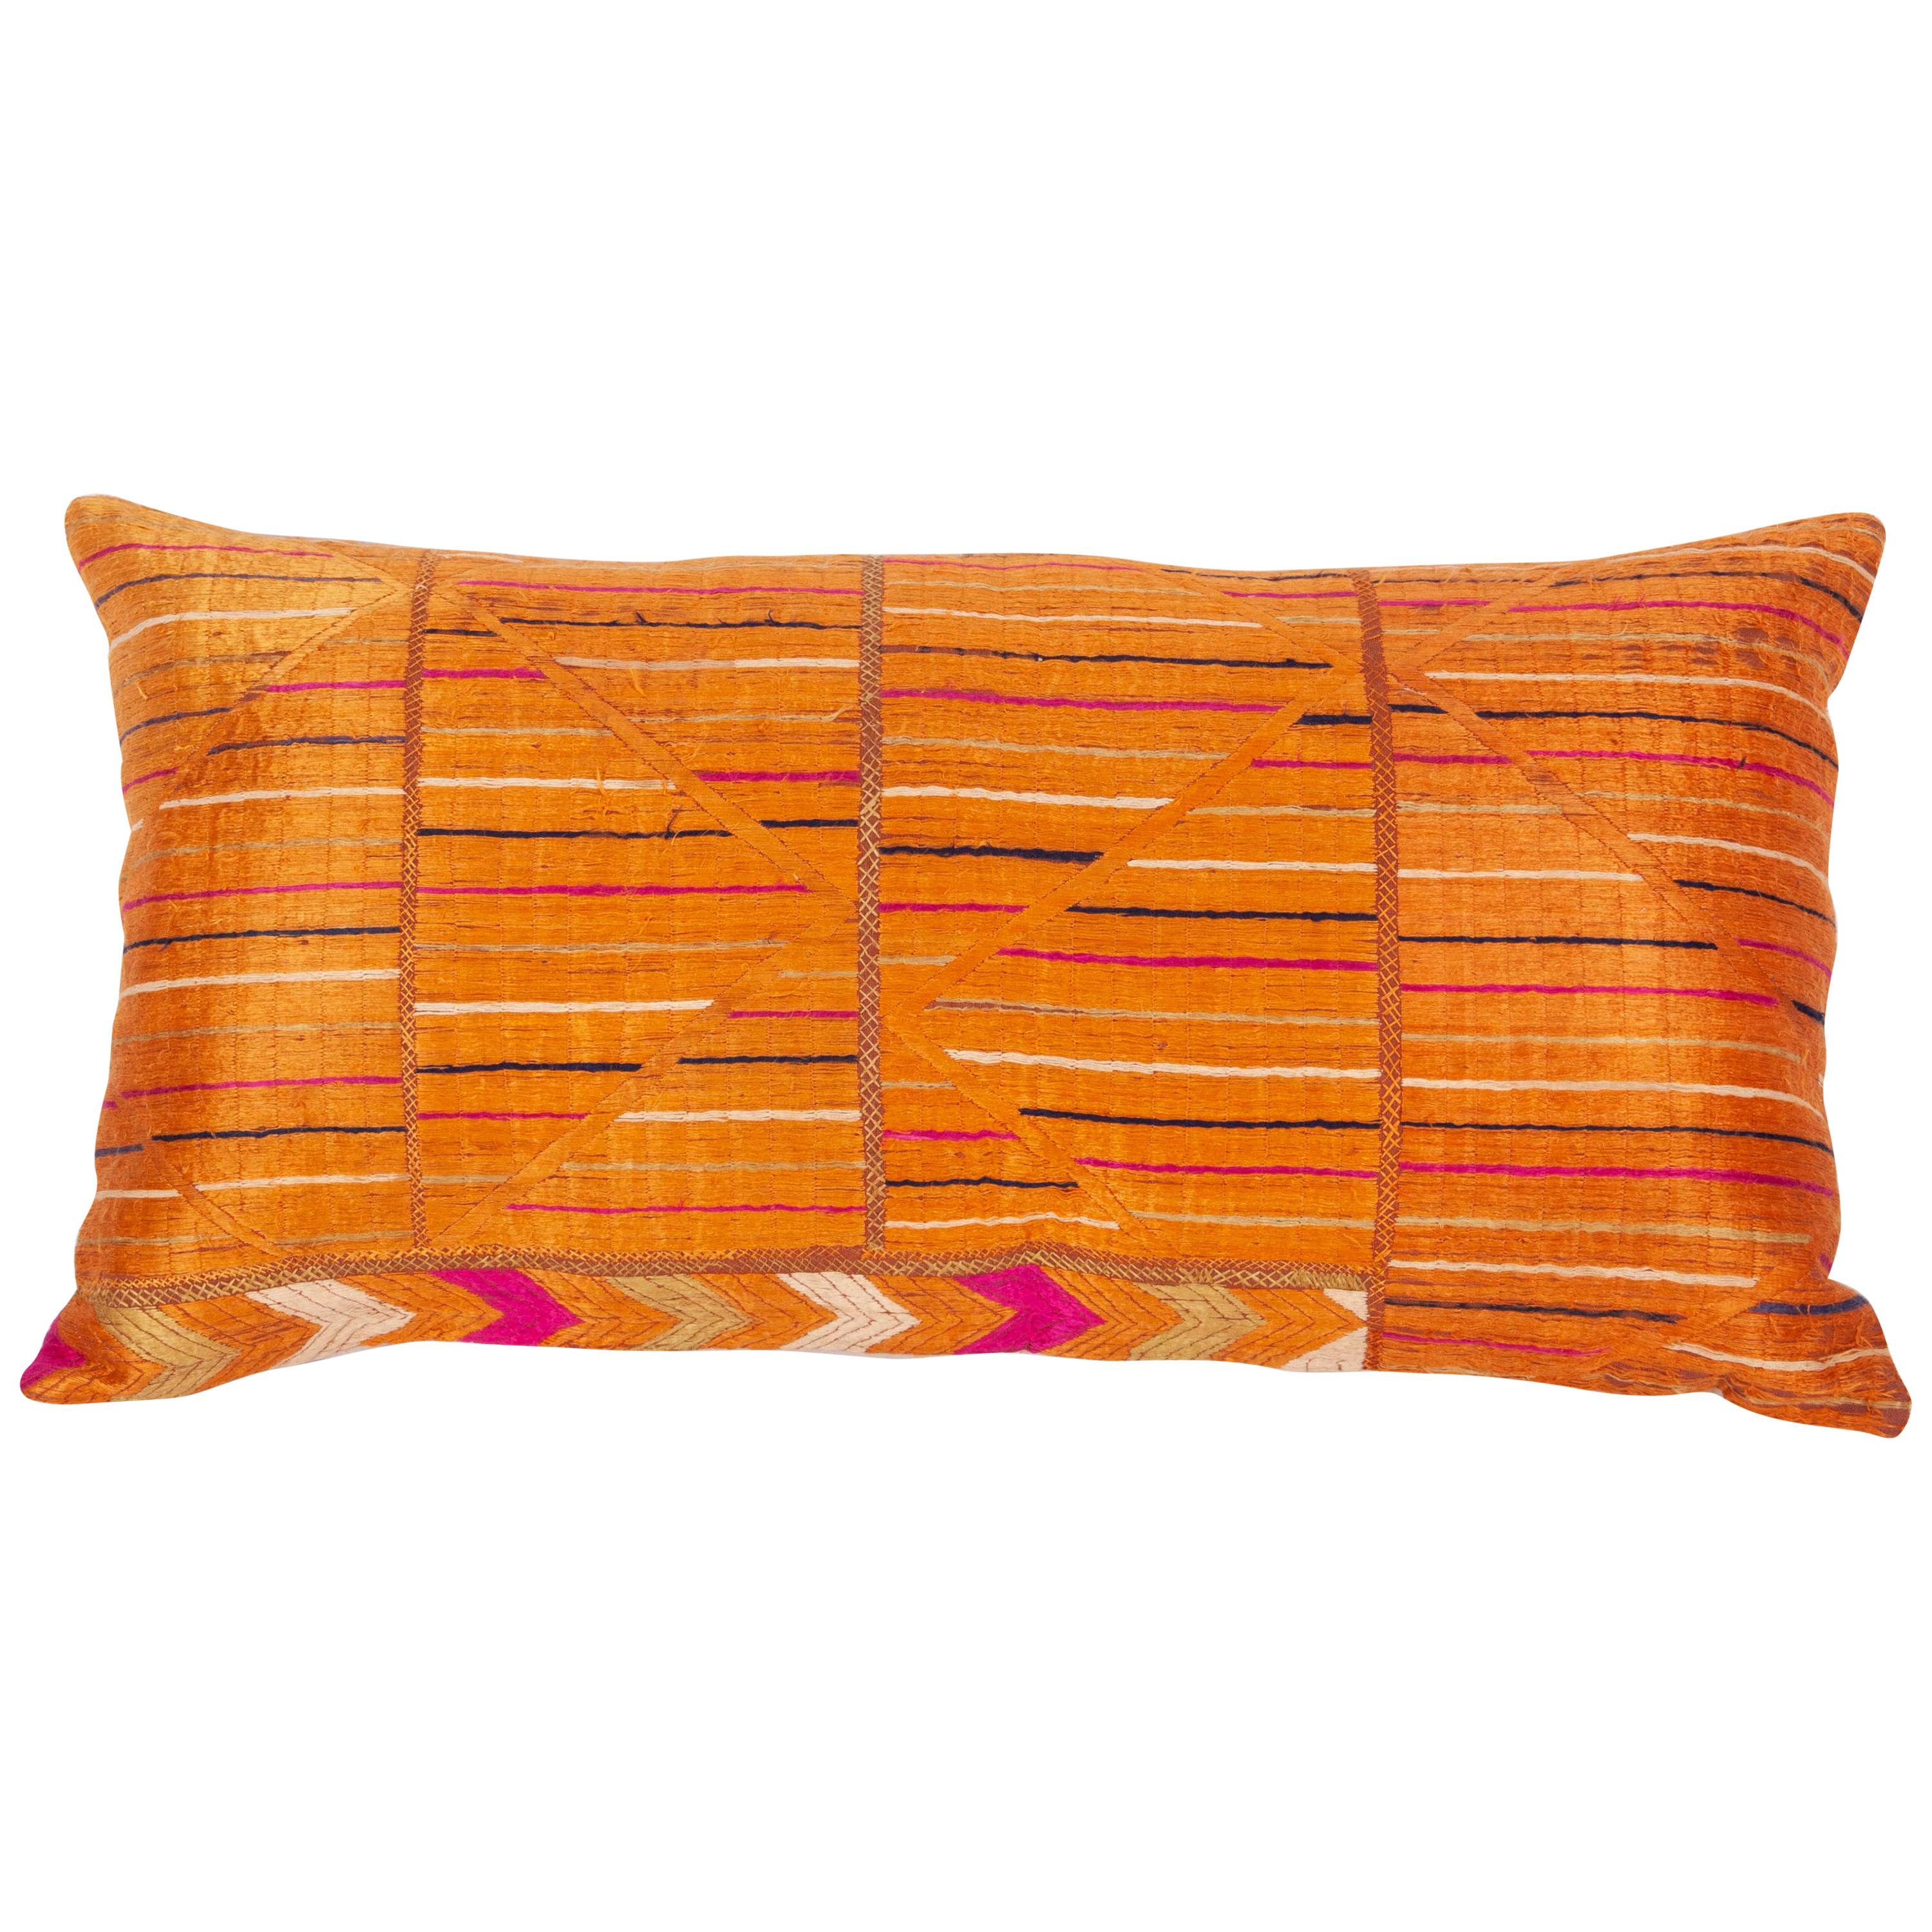 Pillow Case Fashioned from a Phulkari 'Wedding Shawl' from India, 20th Century